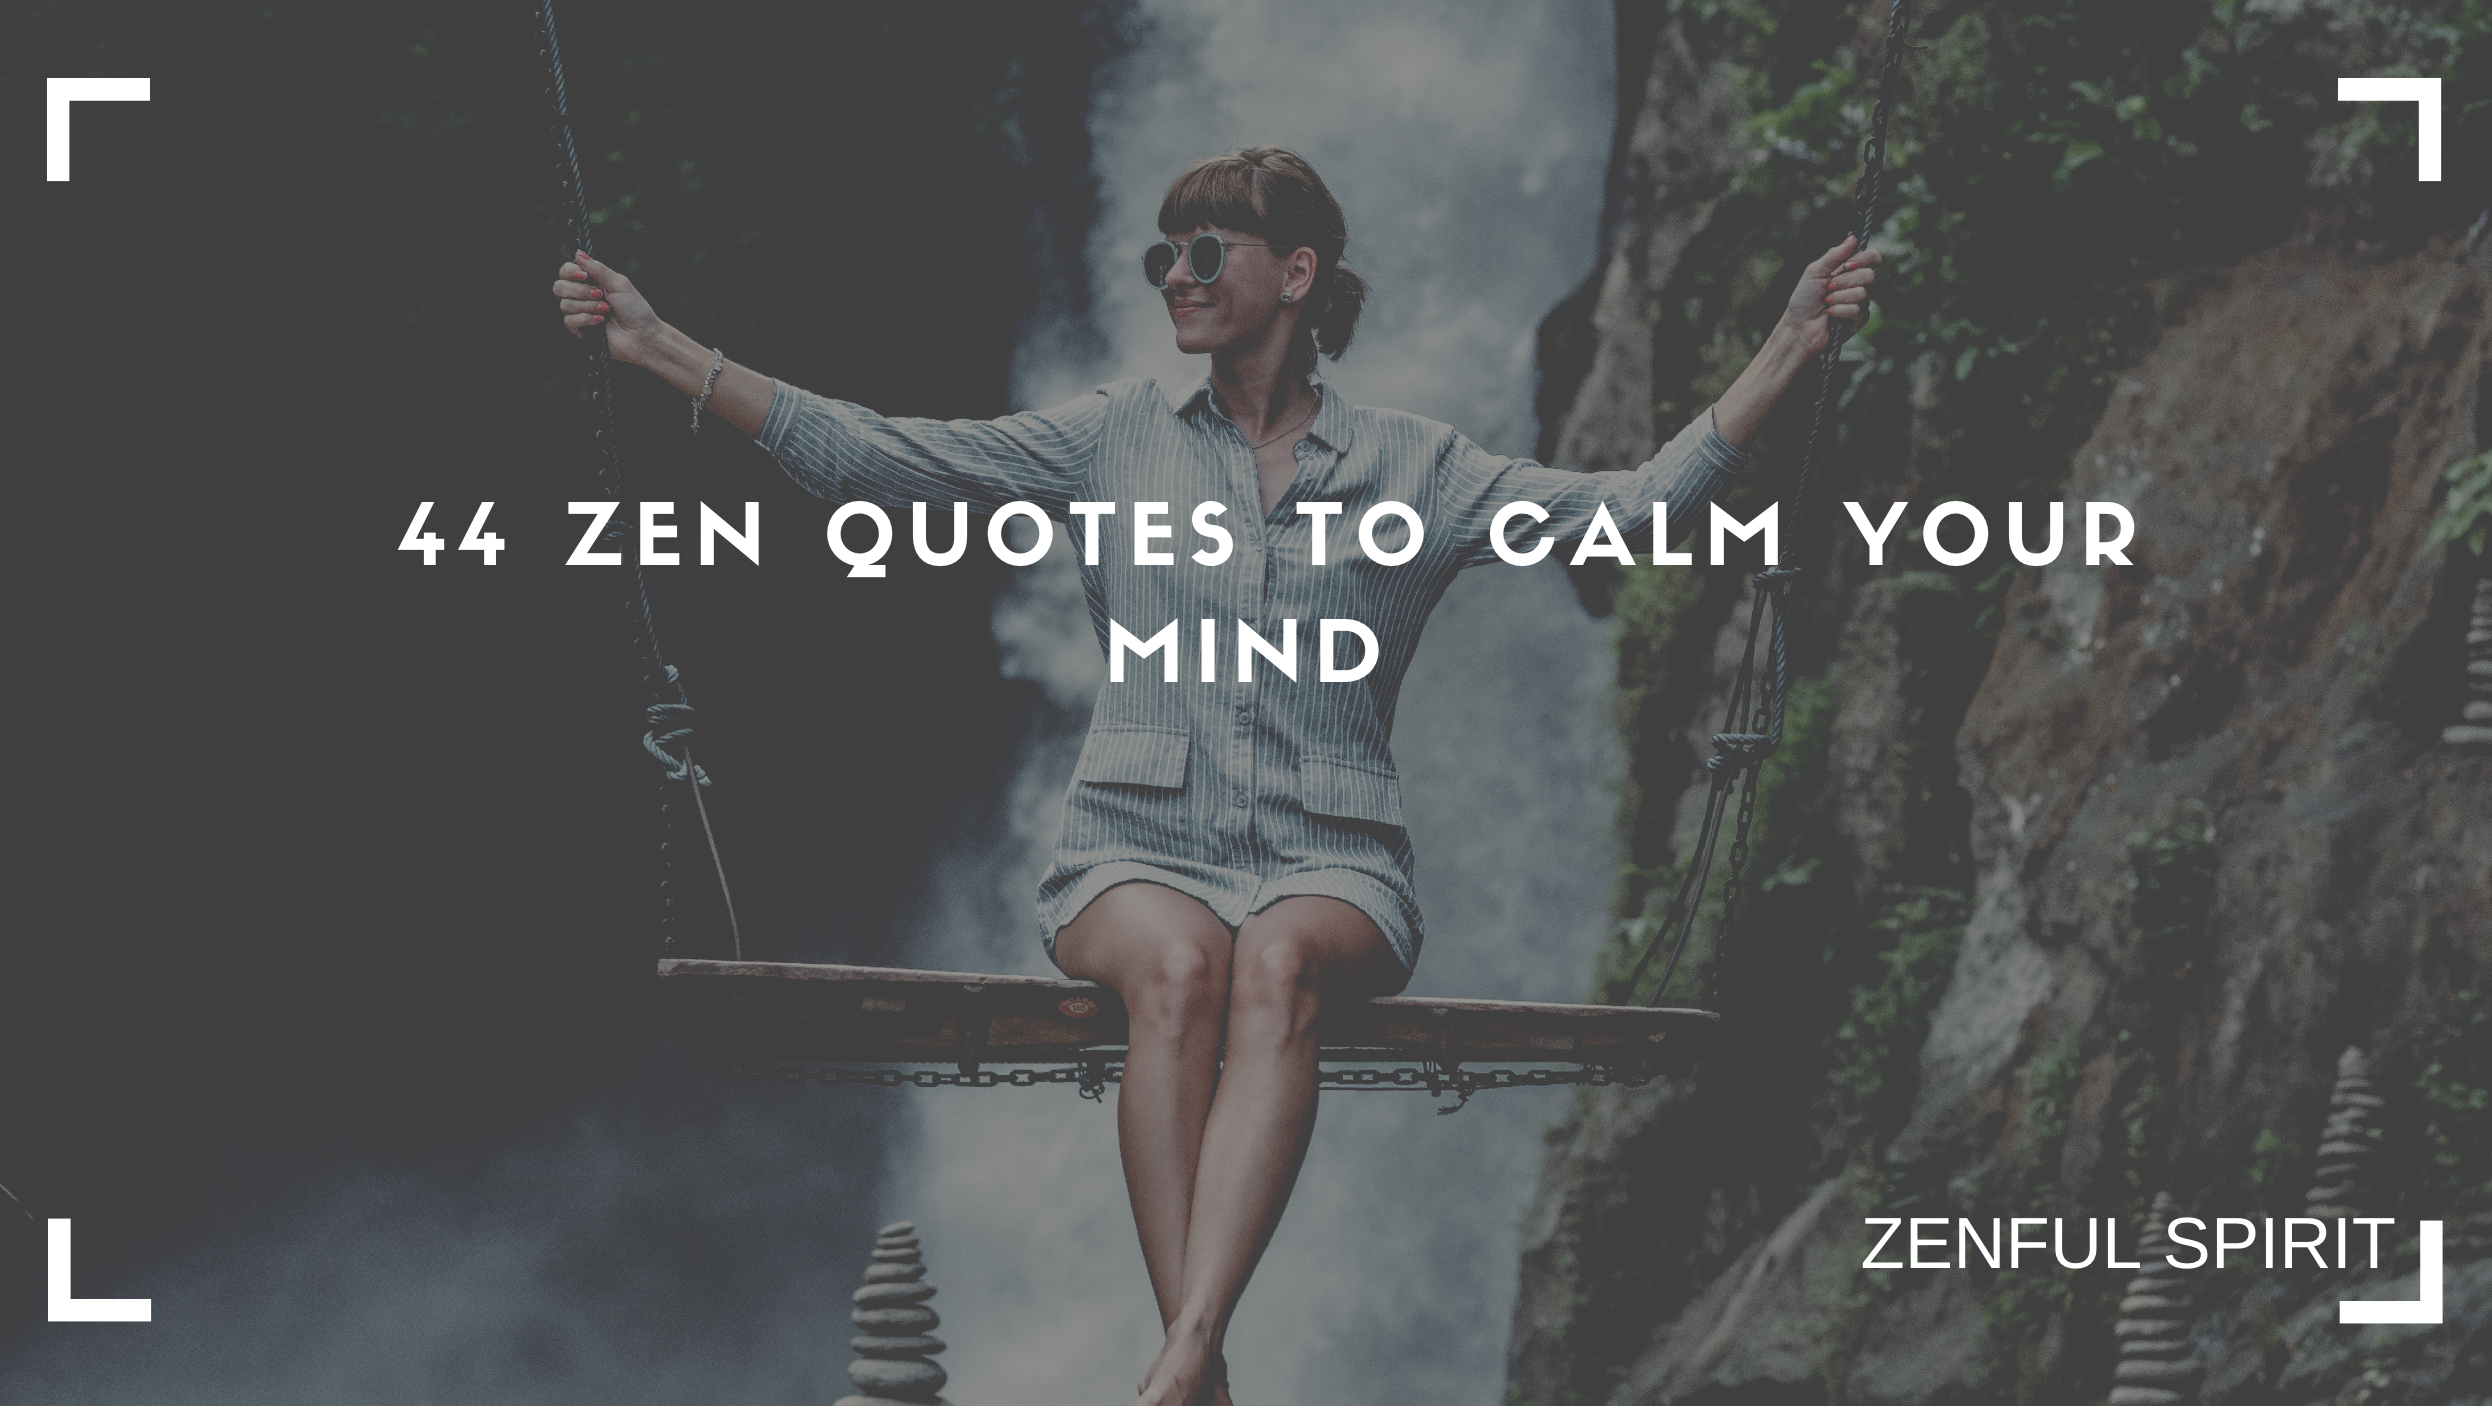 44 Zen Quotes to Calm Your Mind